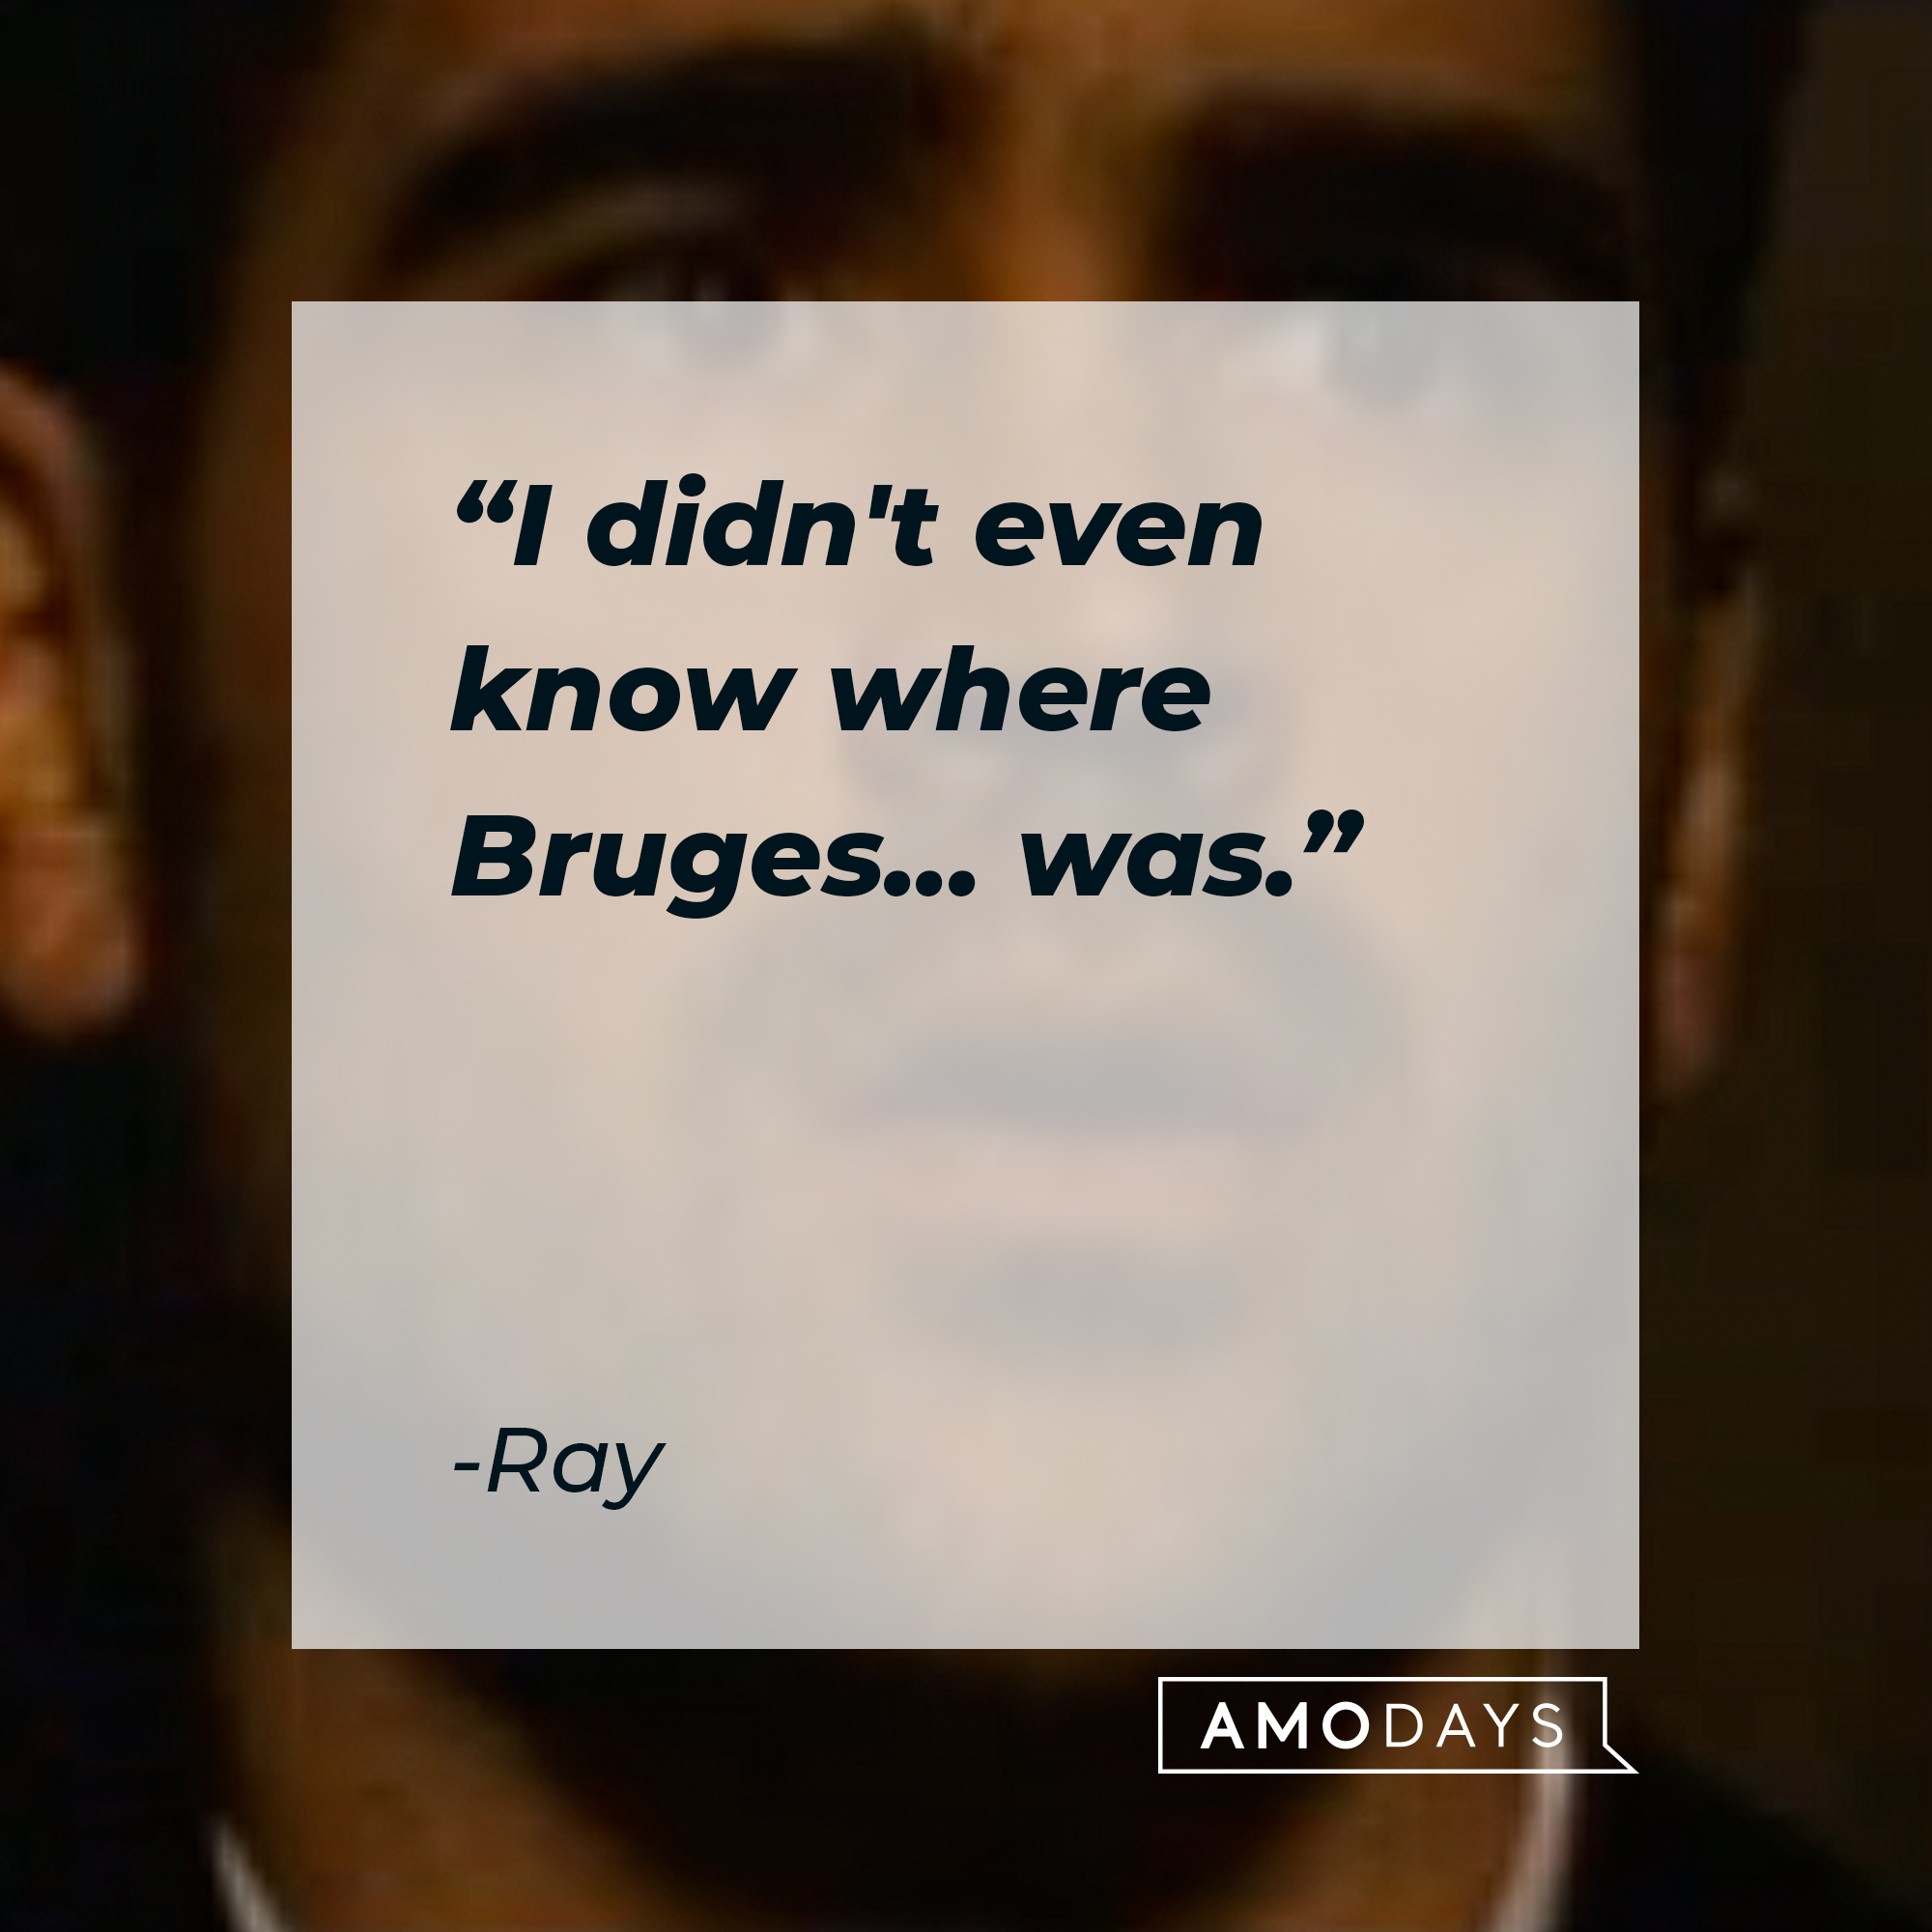 Ray with his quote: “I didn't even know where Bruges...was.” | Source: Youtube.com/FocusFeatures